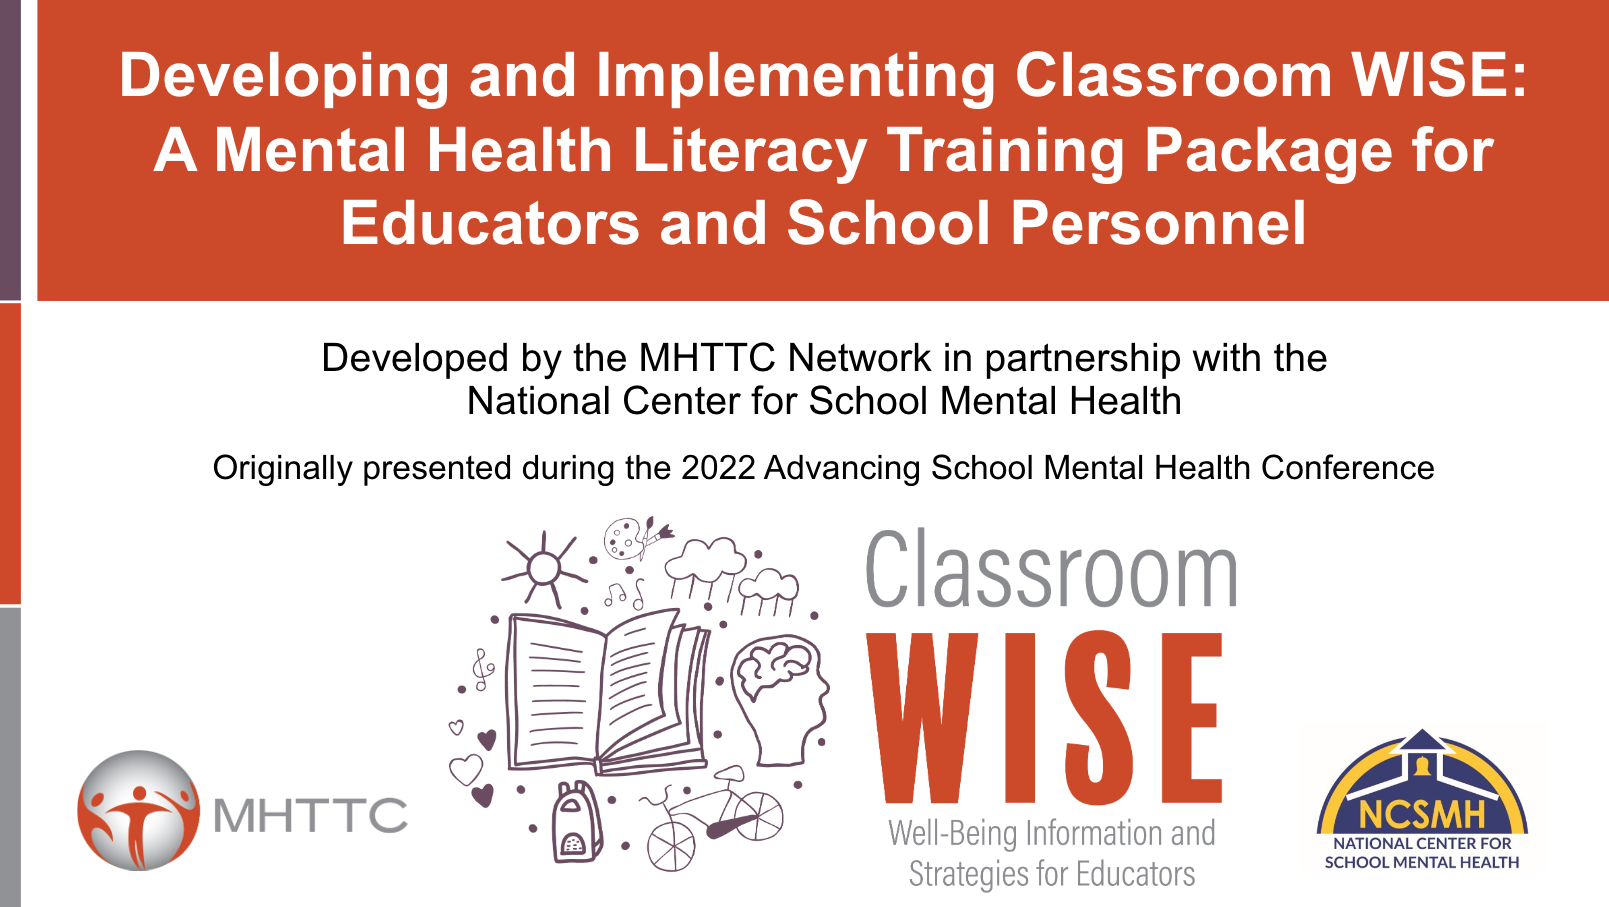 Developing and Implementing Classroom WISE: A Mental Health Literacy Training Package for Educators and School Personnel